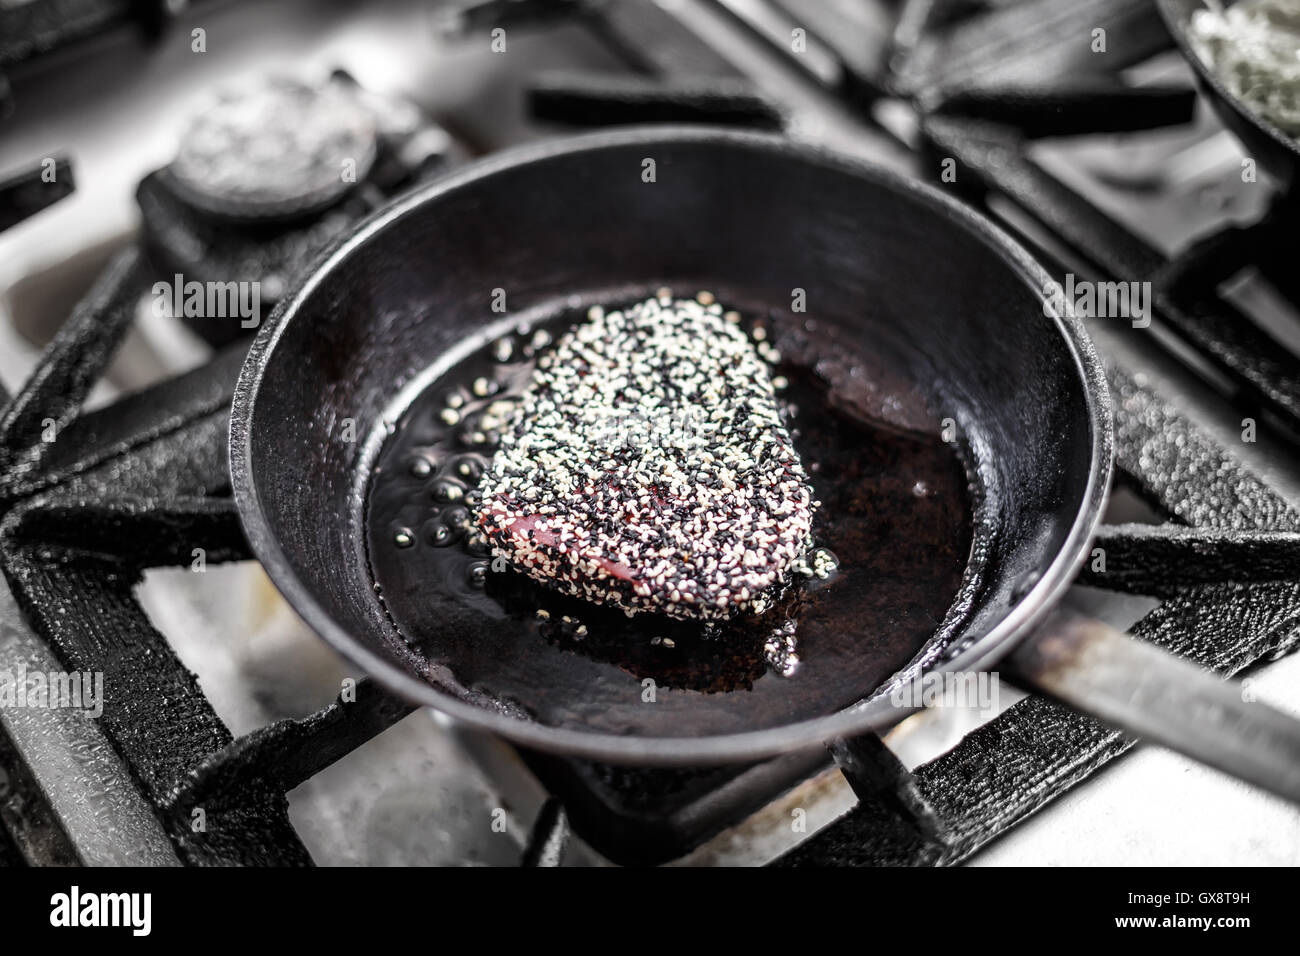 Red tuna steak crusted with white and black sesame seeds being fried on olive oil on pan Stock Photo